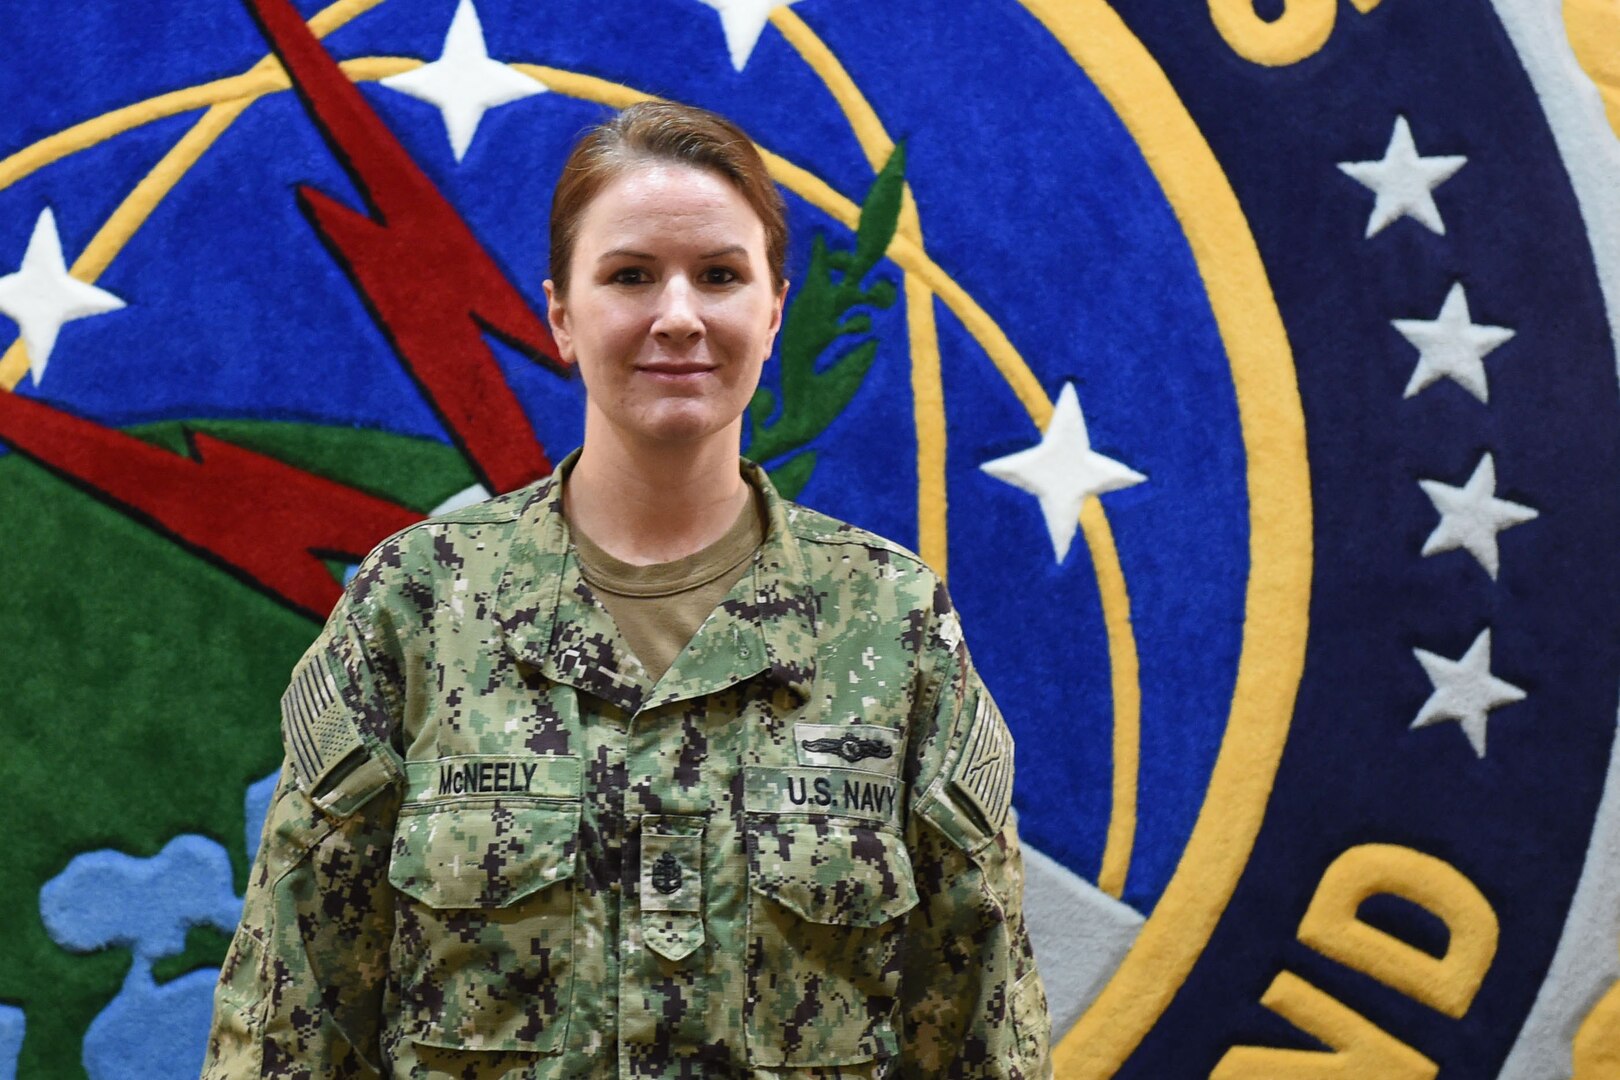 Enlisted Corps Spotlight for August
U.S. Navy Chief Yeoman (IW) Amanda McNeely